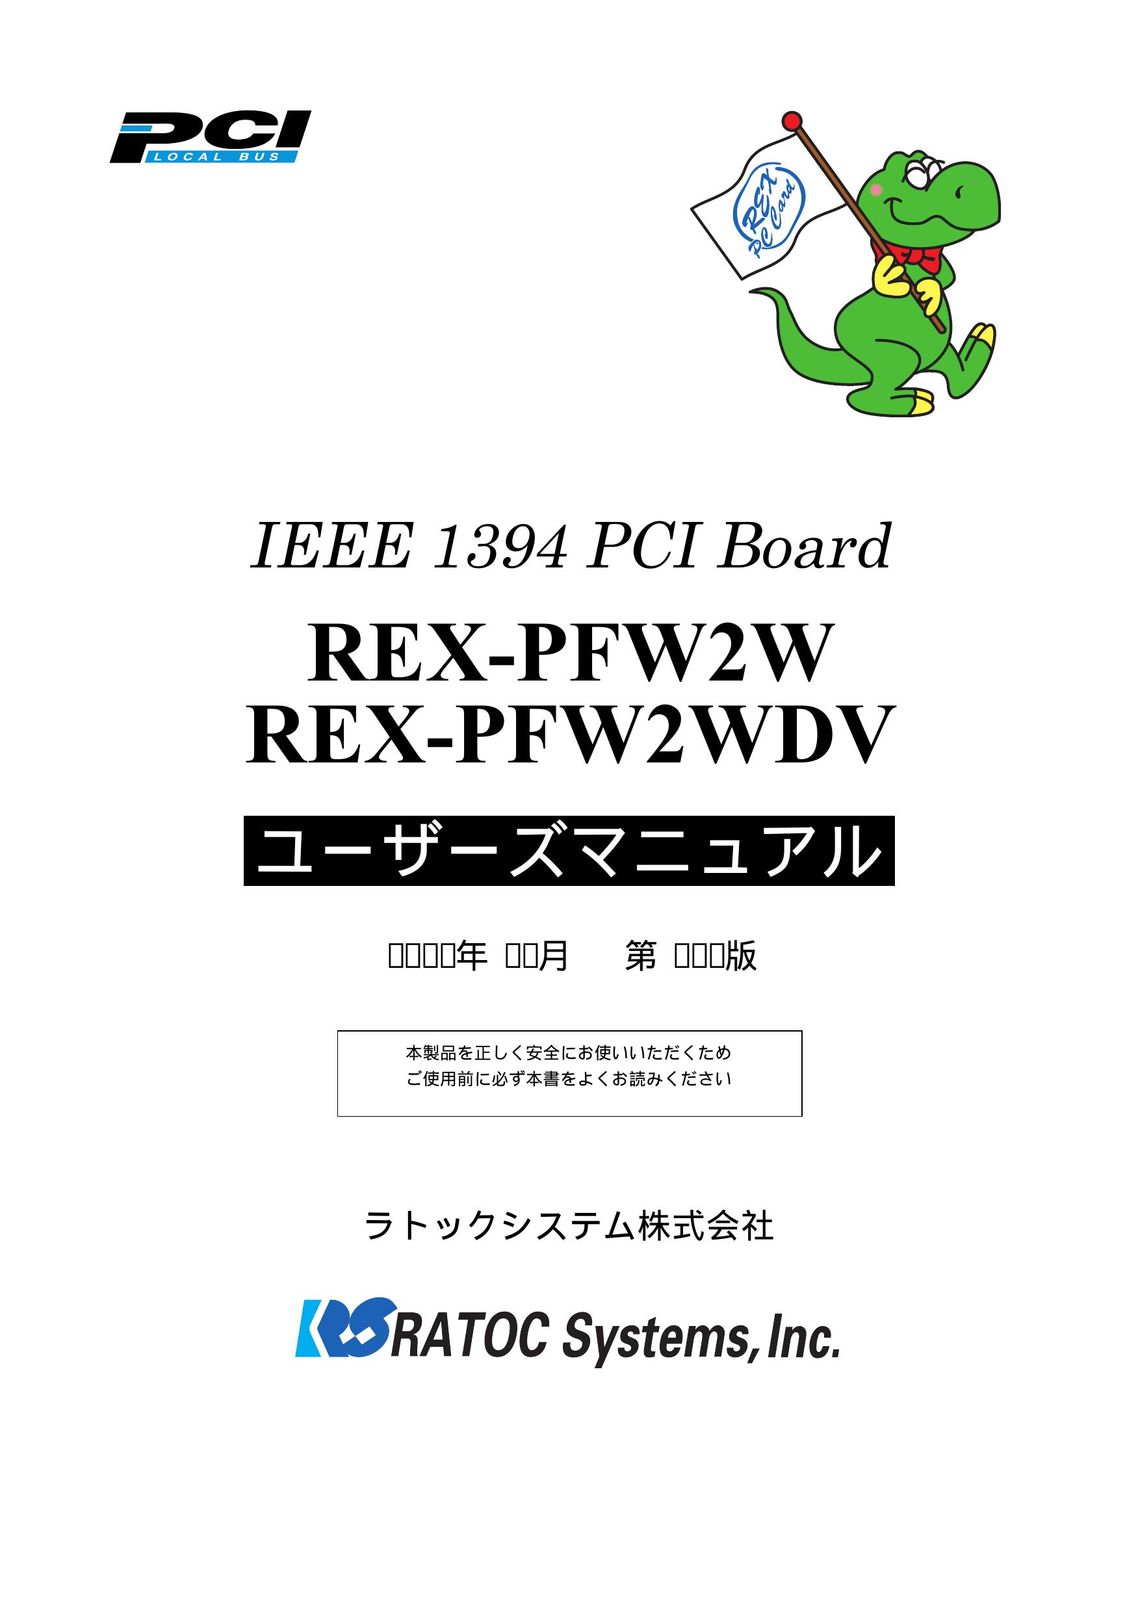 Ratoc Systems REX-PFW2W Network Card User Manual